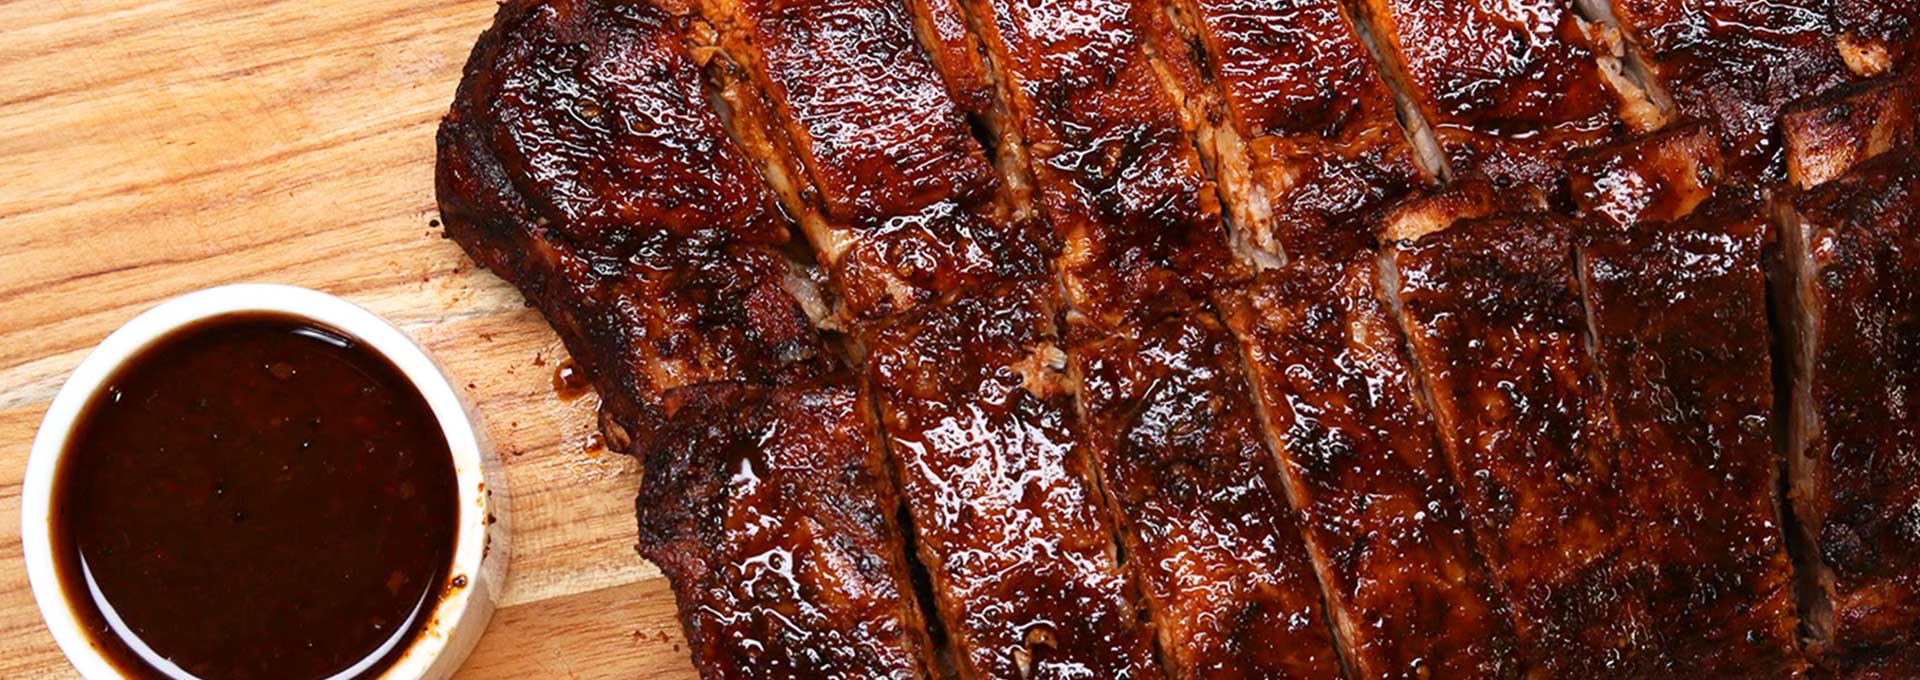 photo of ribs and sauce